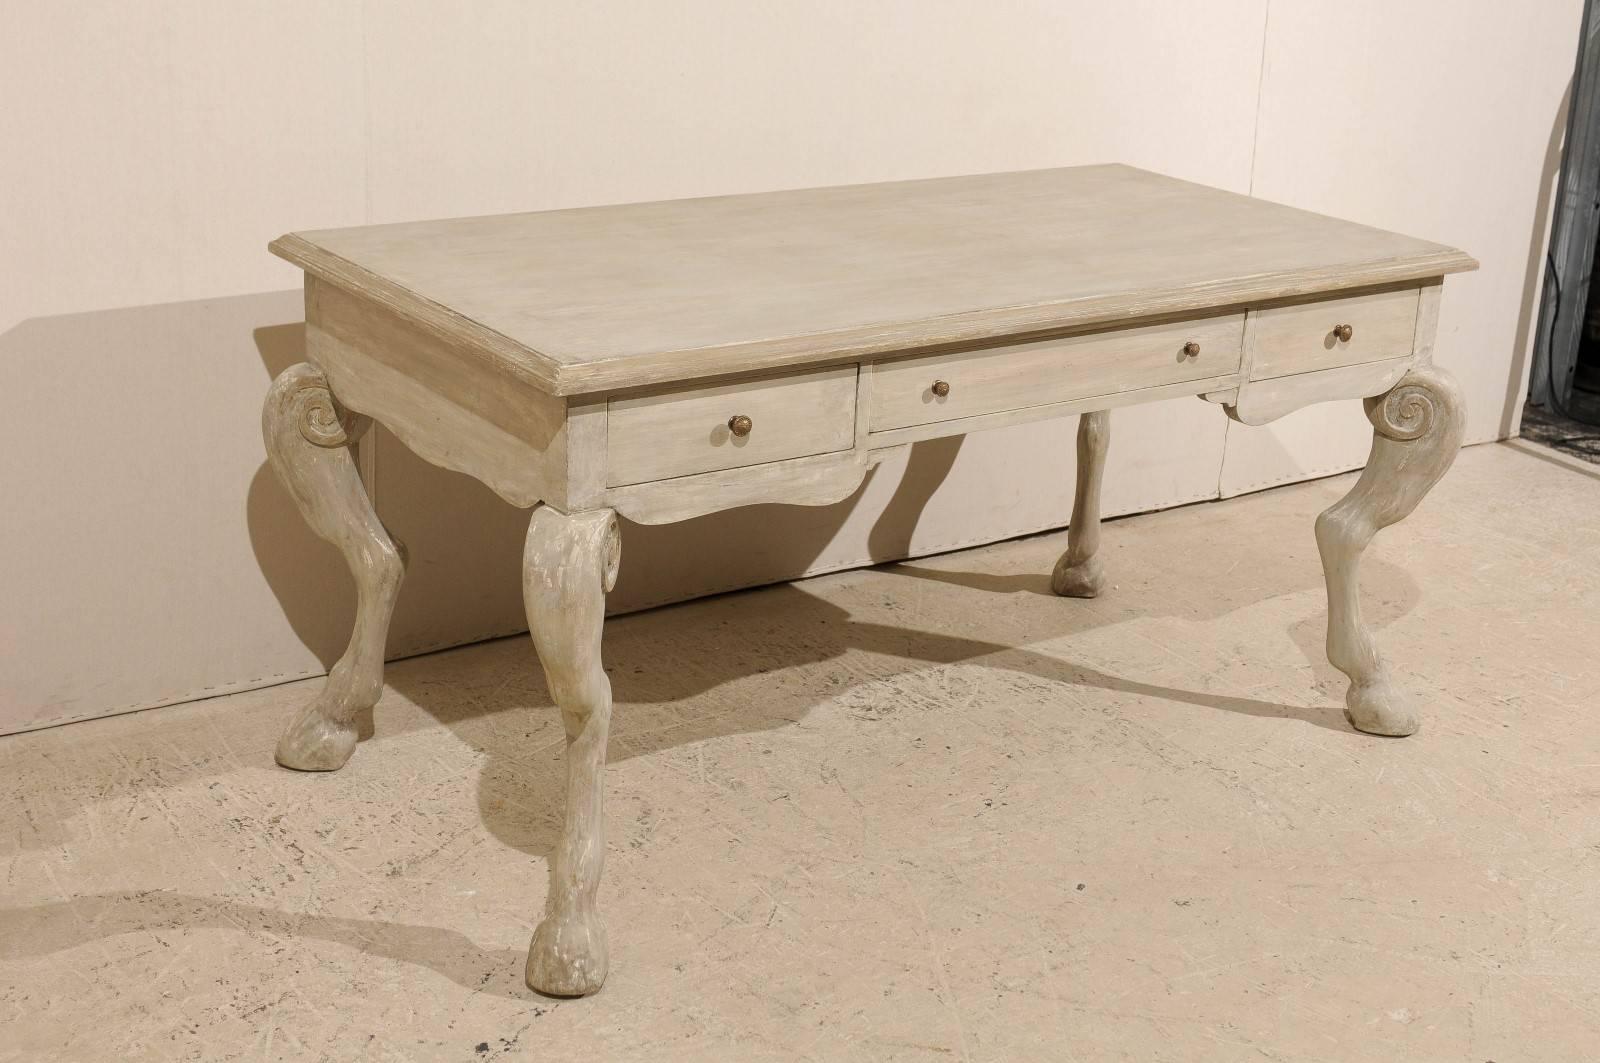 table with animal legs